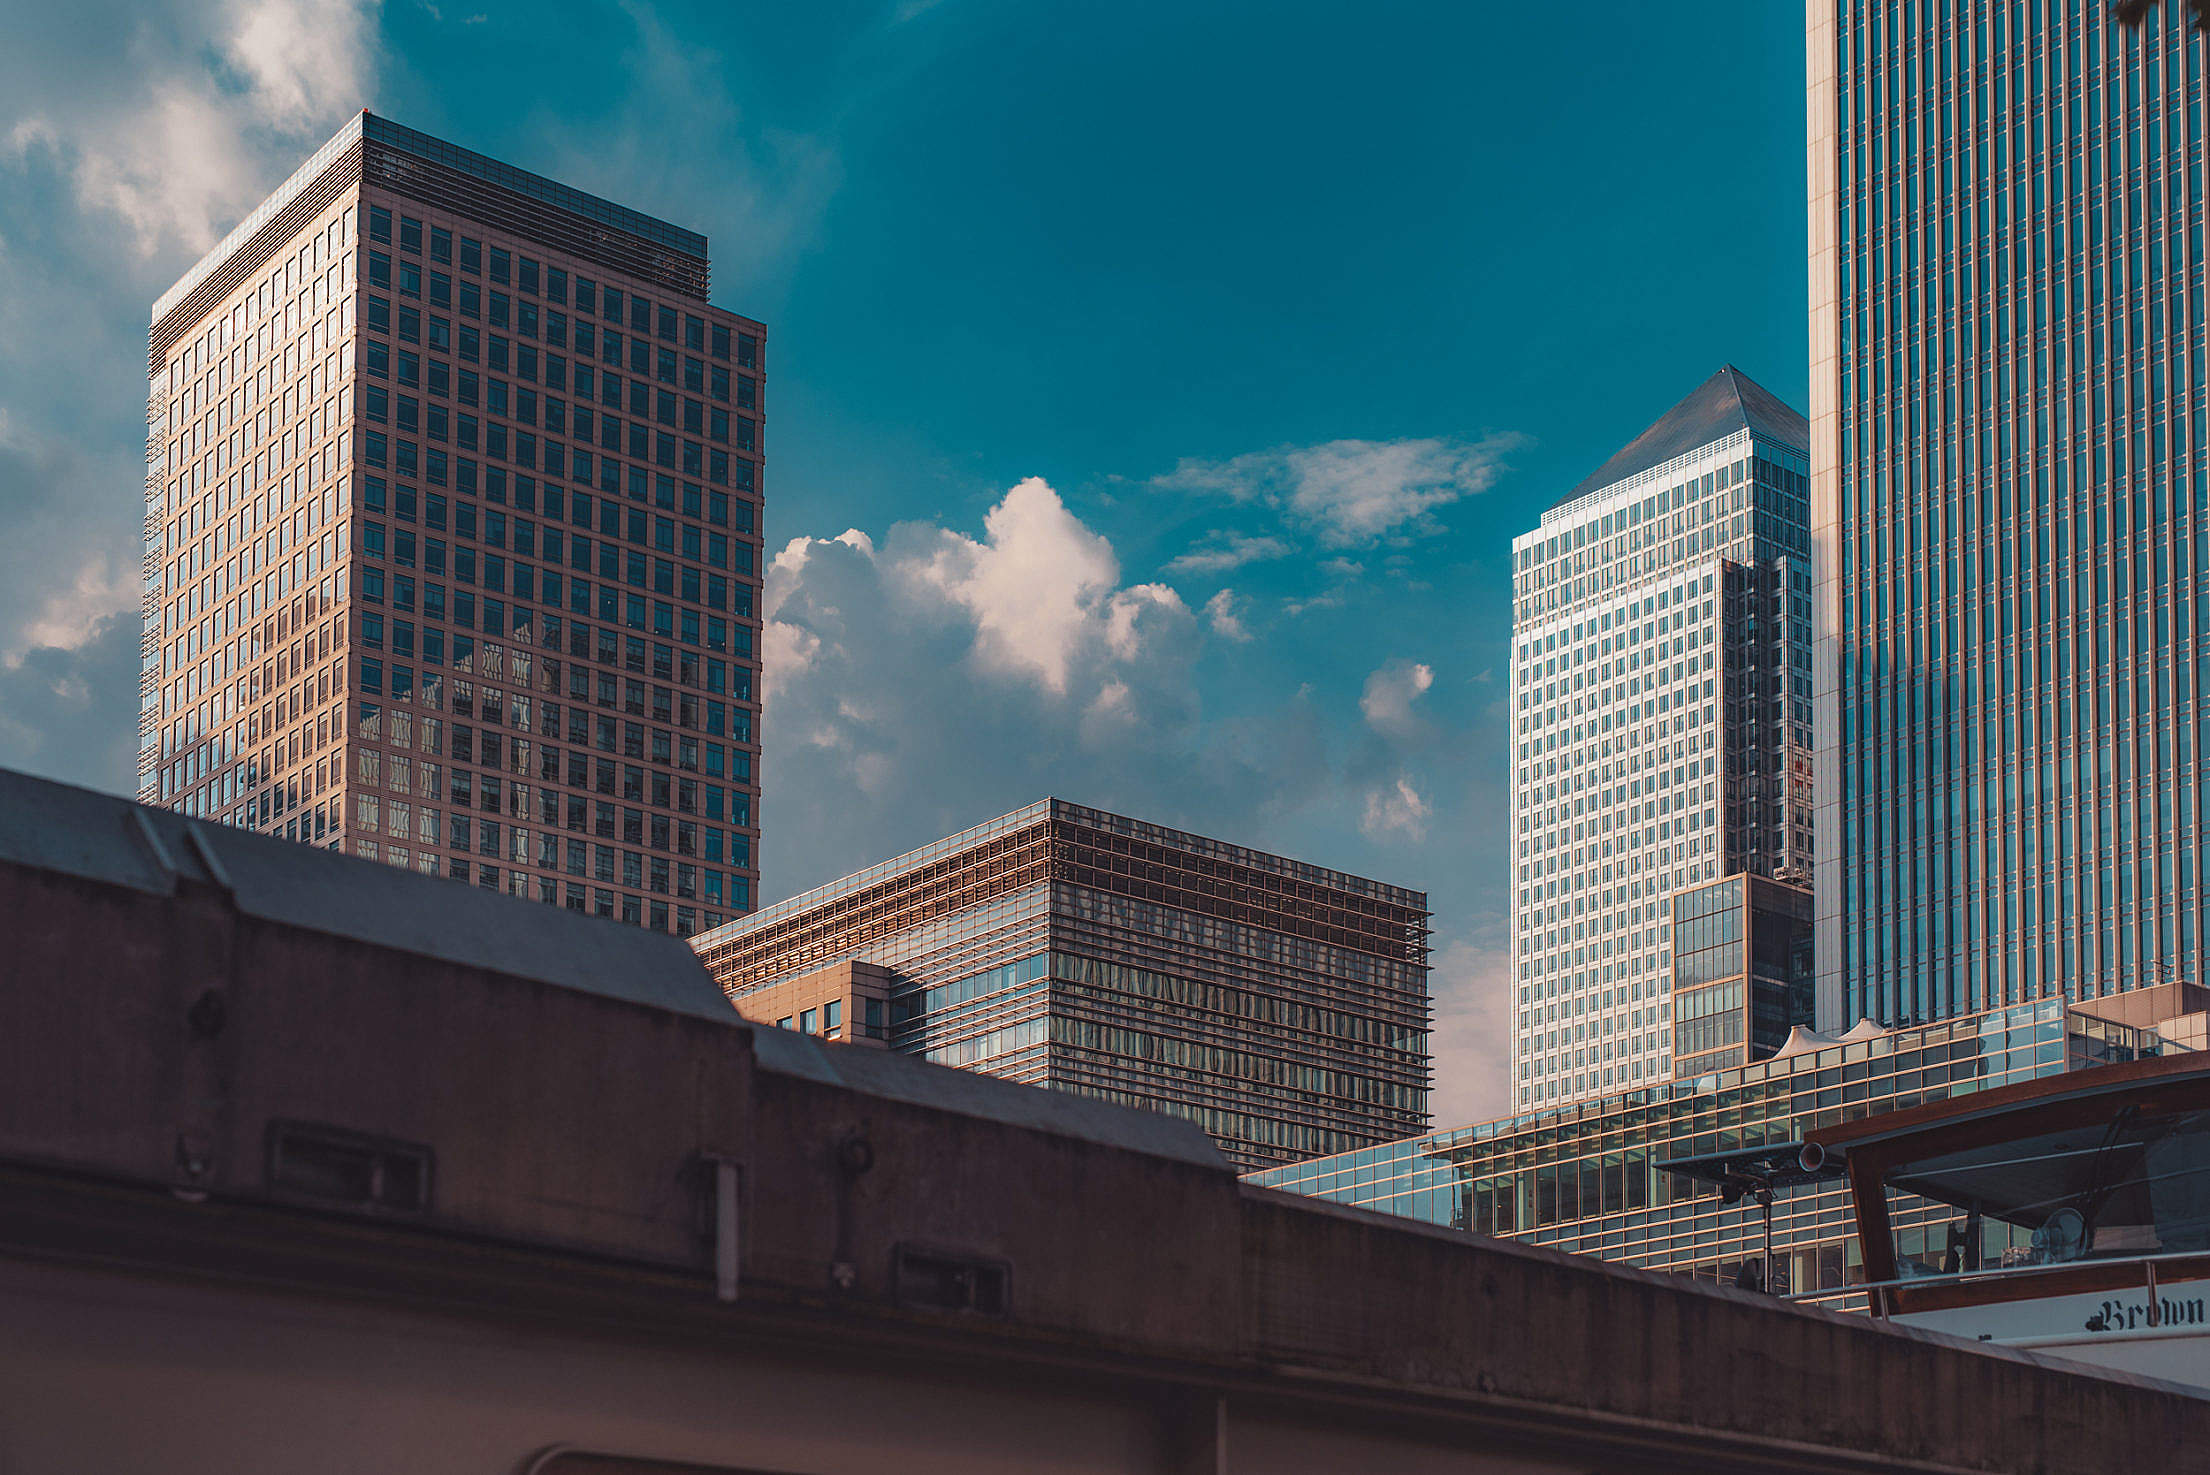 Roofs of London Canary Wharf Business and Banking Centre Free Stock Photo